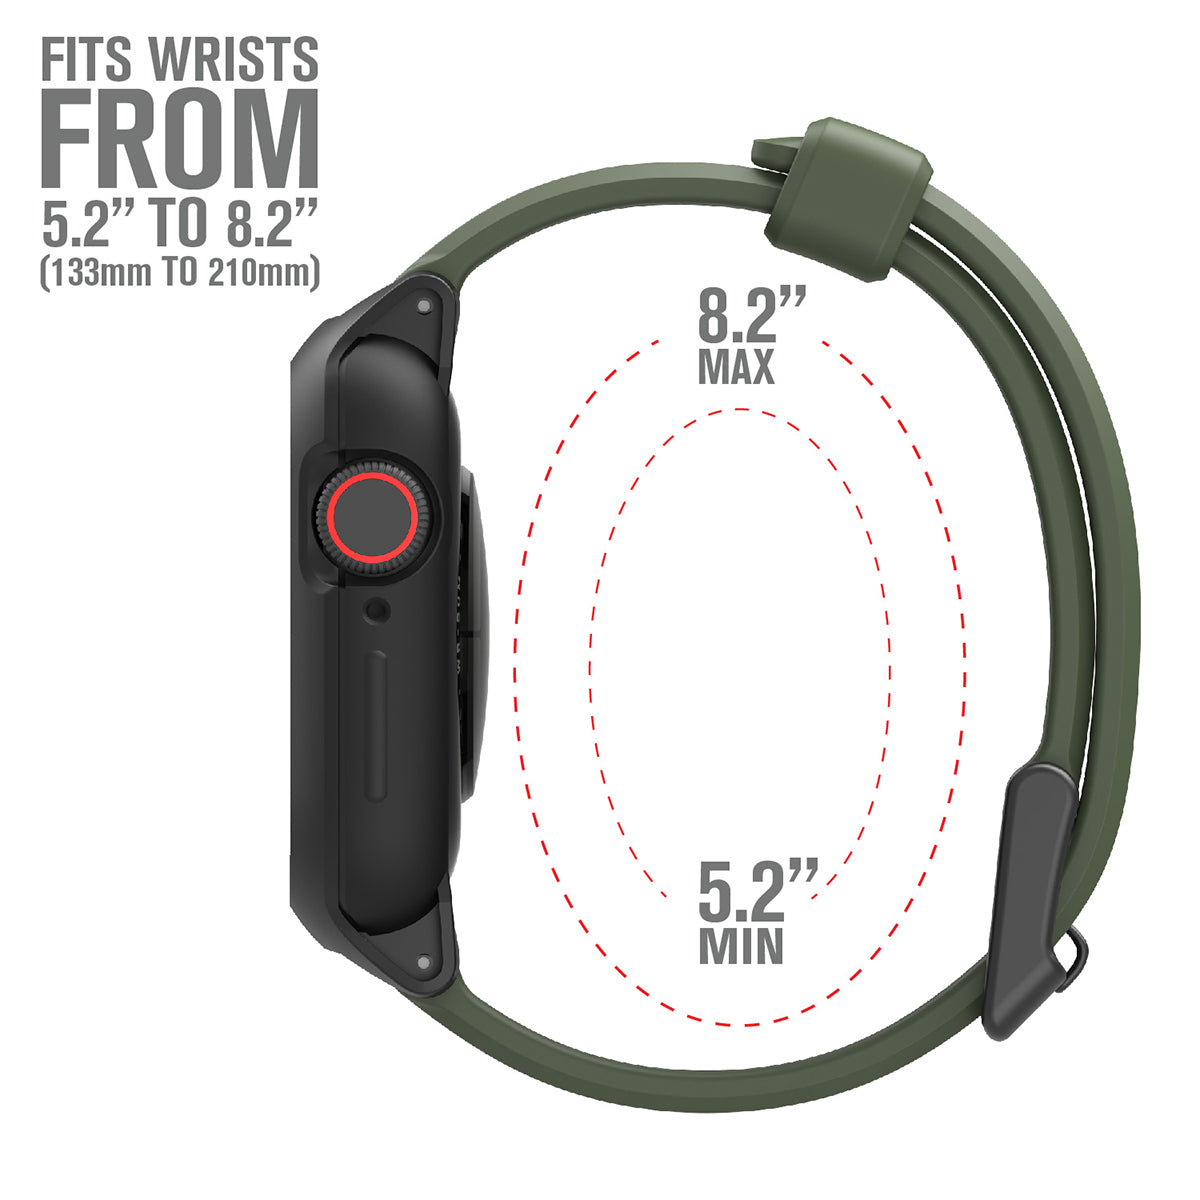 catalyst apple watch series 9 8 7 6 5 4 SE Gen 2 1 38 40 41mm sport band buckle edition side view of the case with the minimum and maximum sizes of the band army green text reads fits wrists from 5.2" to 8.2"(133mm to 210mm)